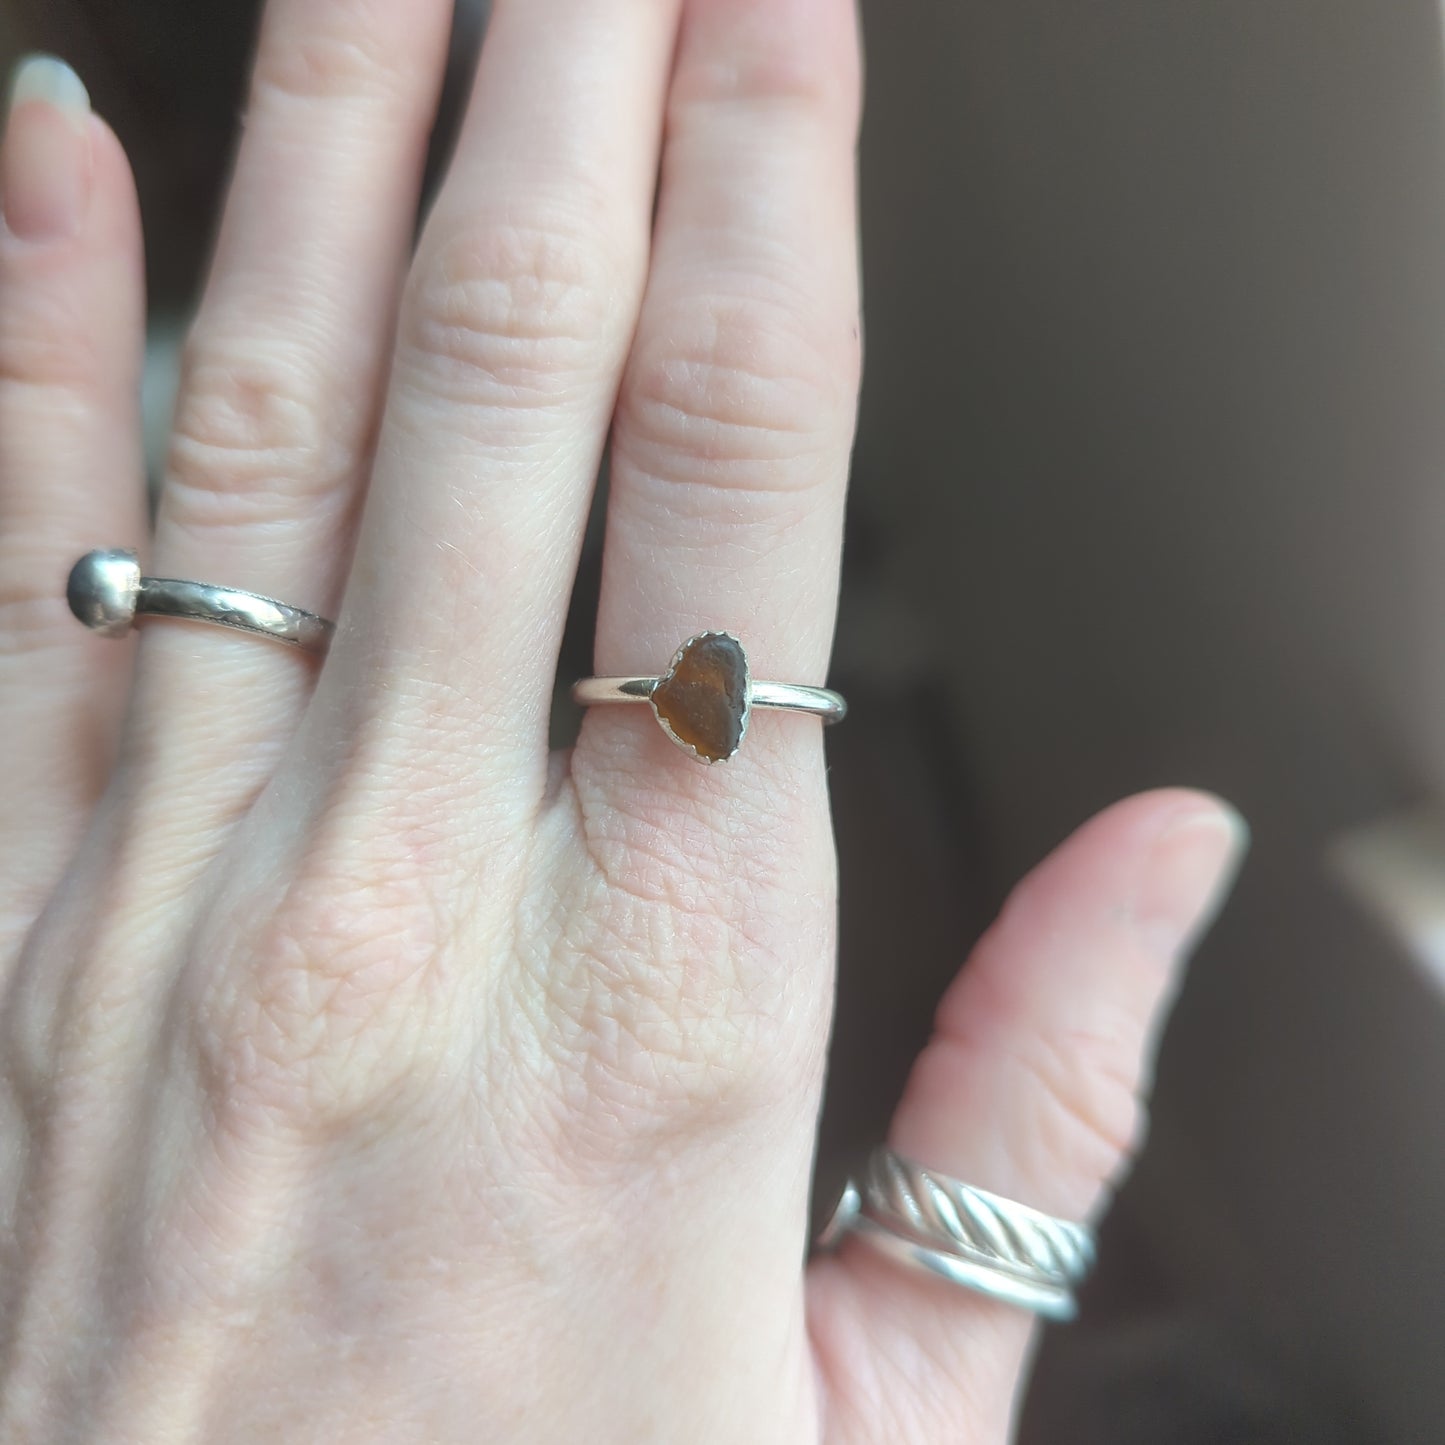 Brown Seaglass Sterling Silver Ring - Size 6